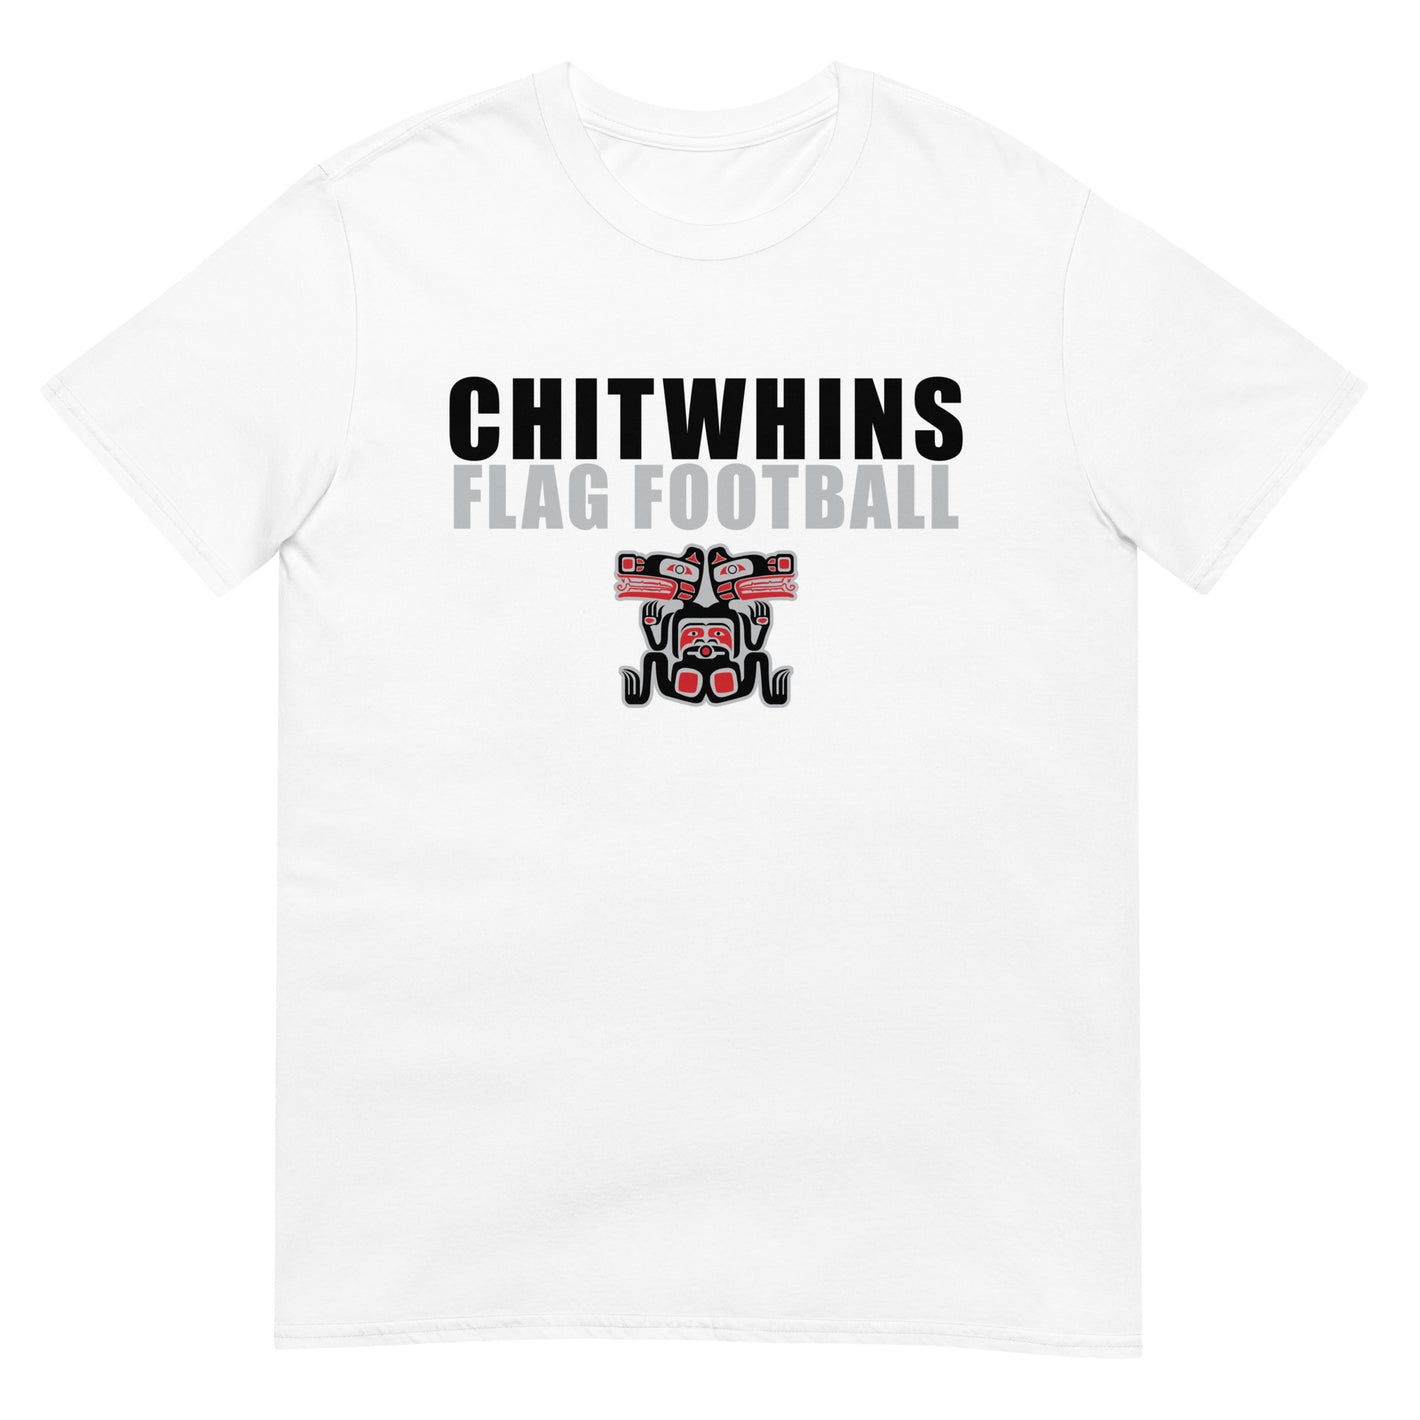 Chitwhins Middle s Flag Football Short-Sleeve Unisex T-Shirt